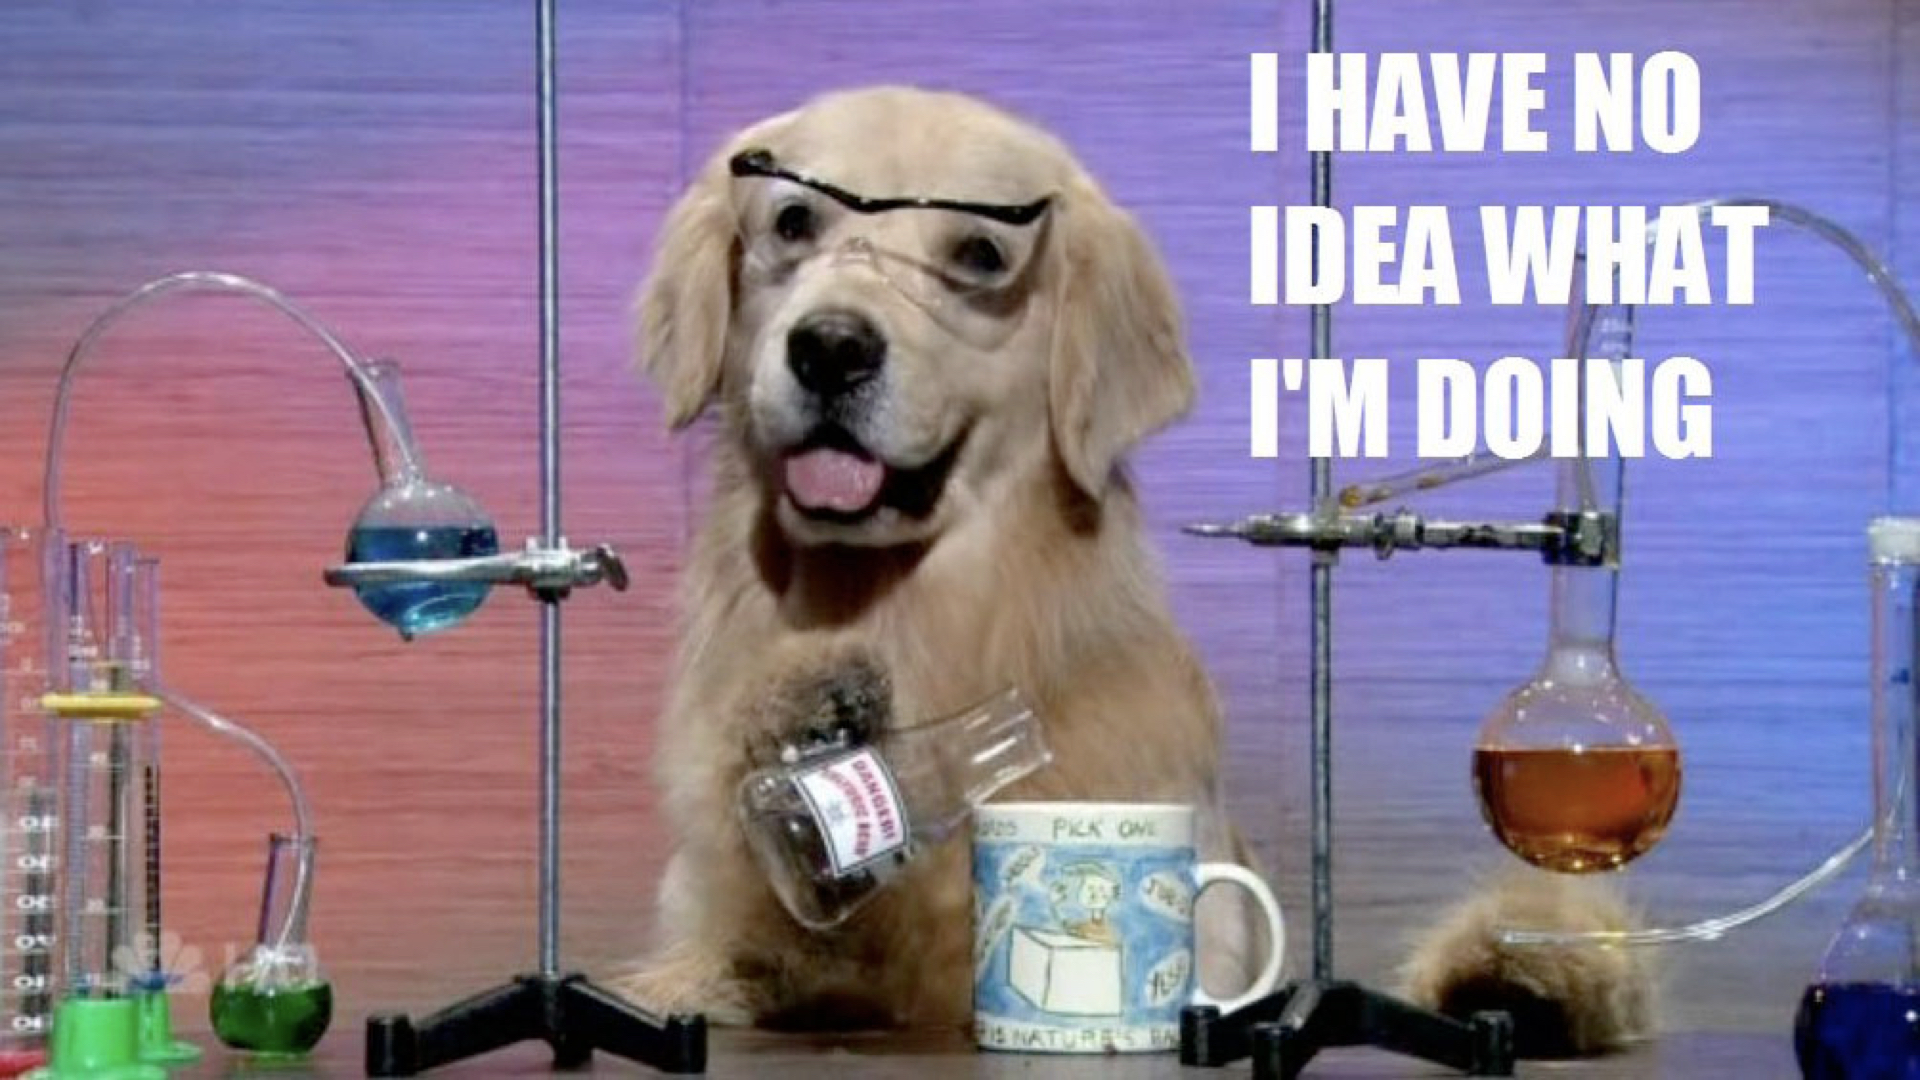 A labrador in a science lab wearing safety goggles, pouring a beaker into a mug, with the text superimposed: "I have no idea what I'm doing."